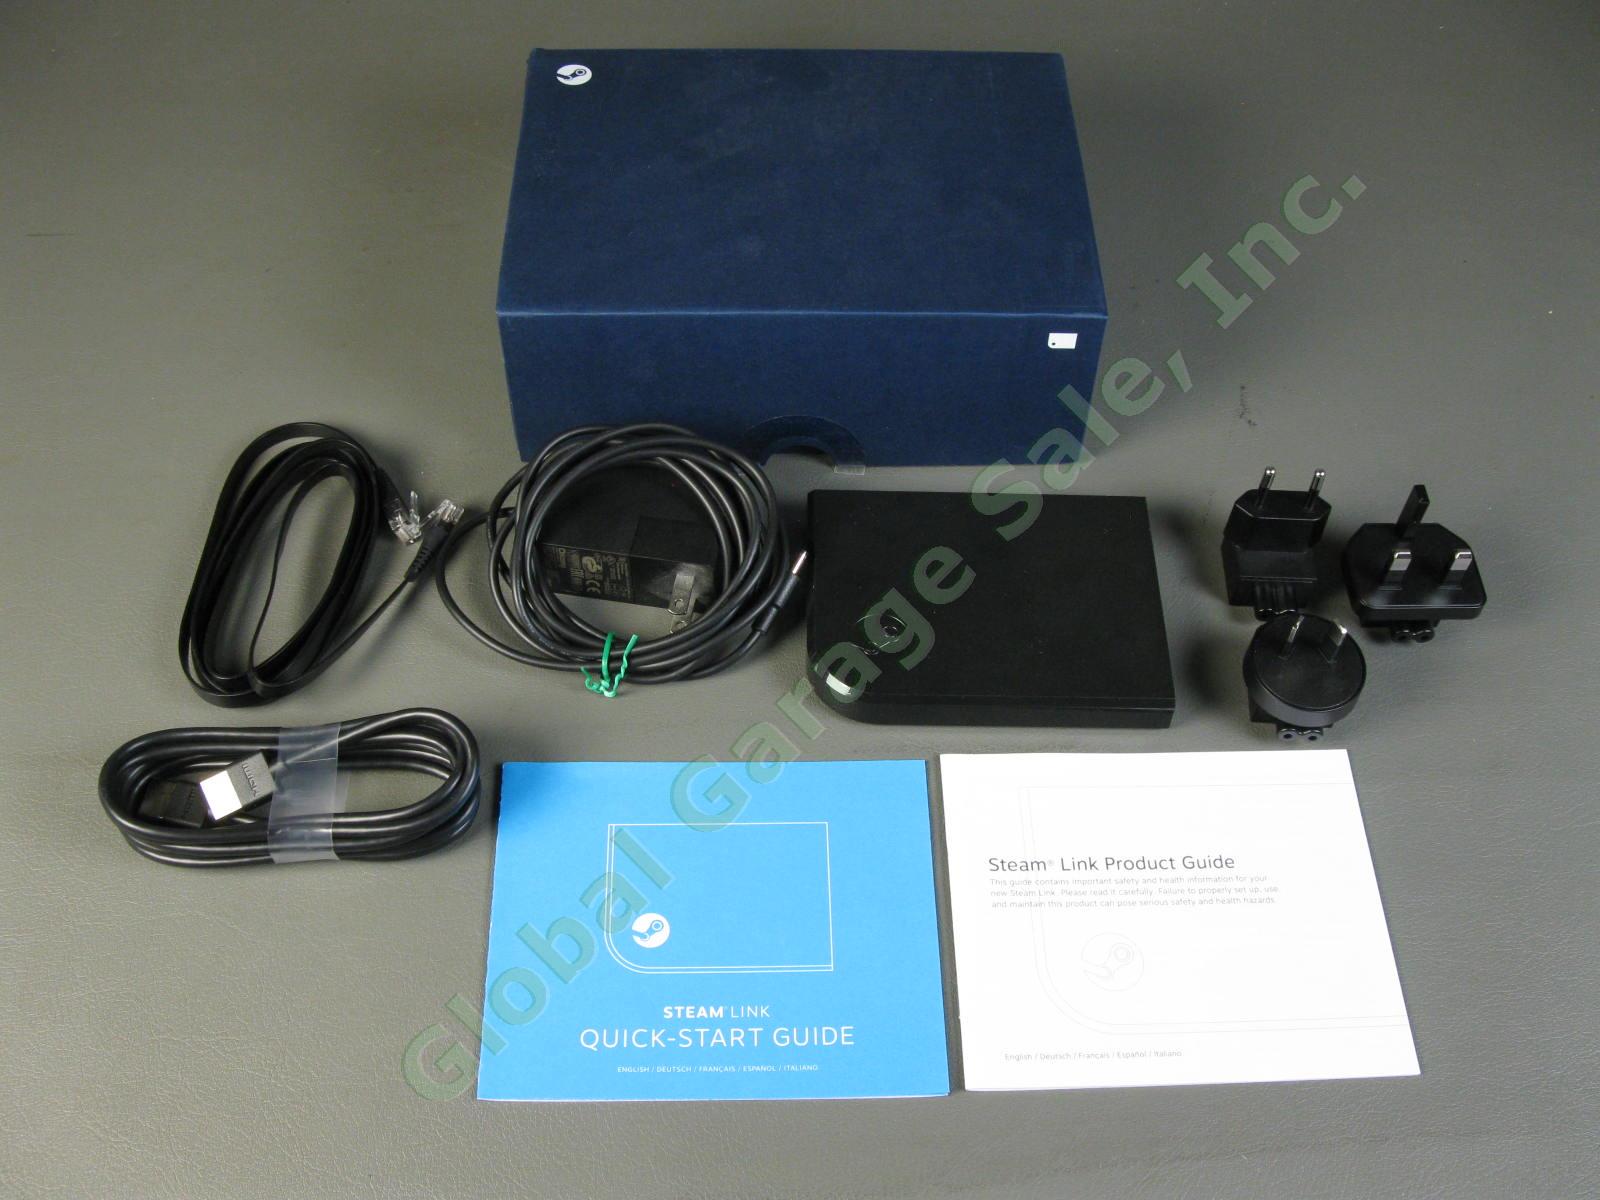 Valve Steam Link Model 1003 HDMI USB Power Adapter User Guide Perfect Condition